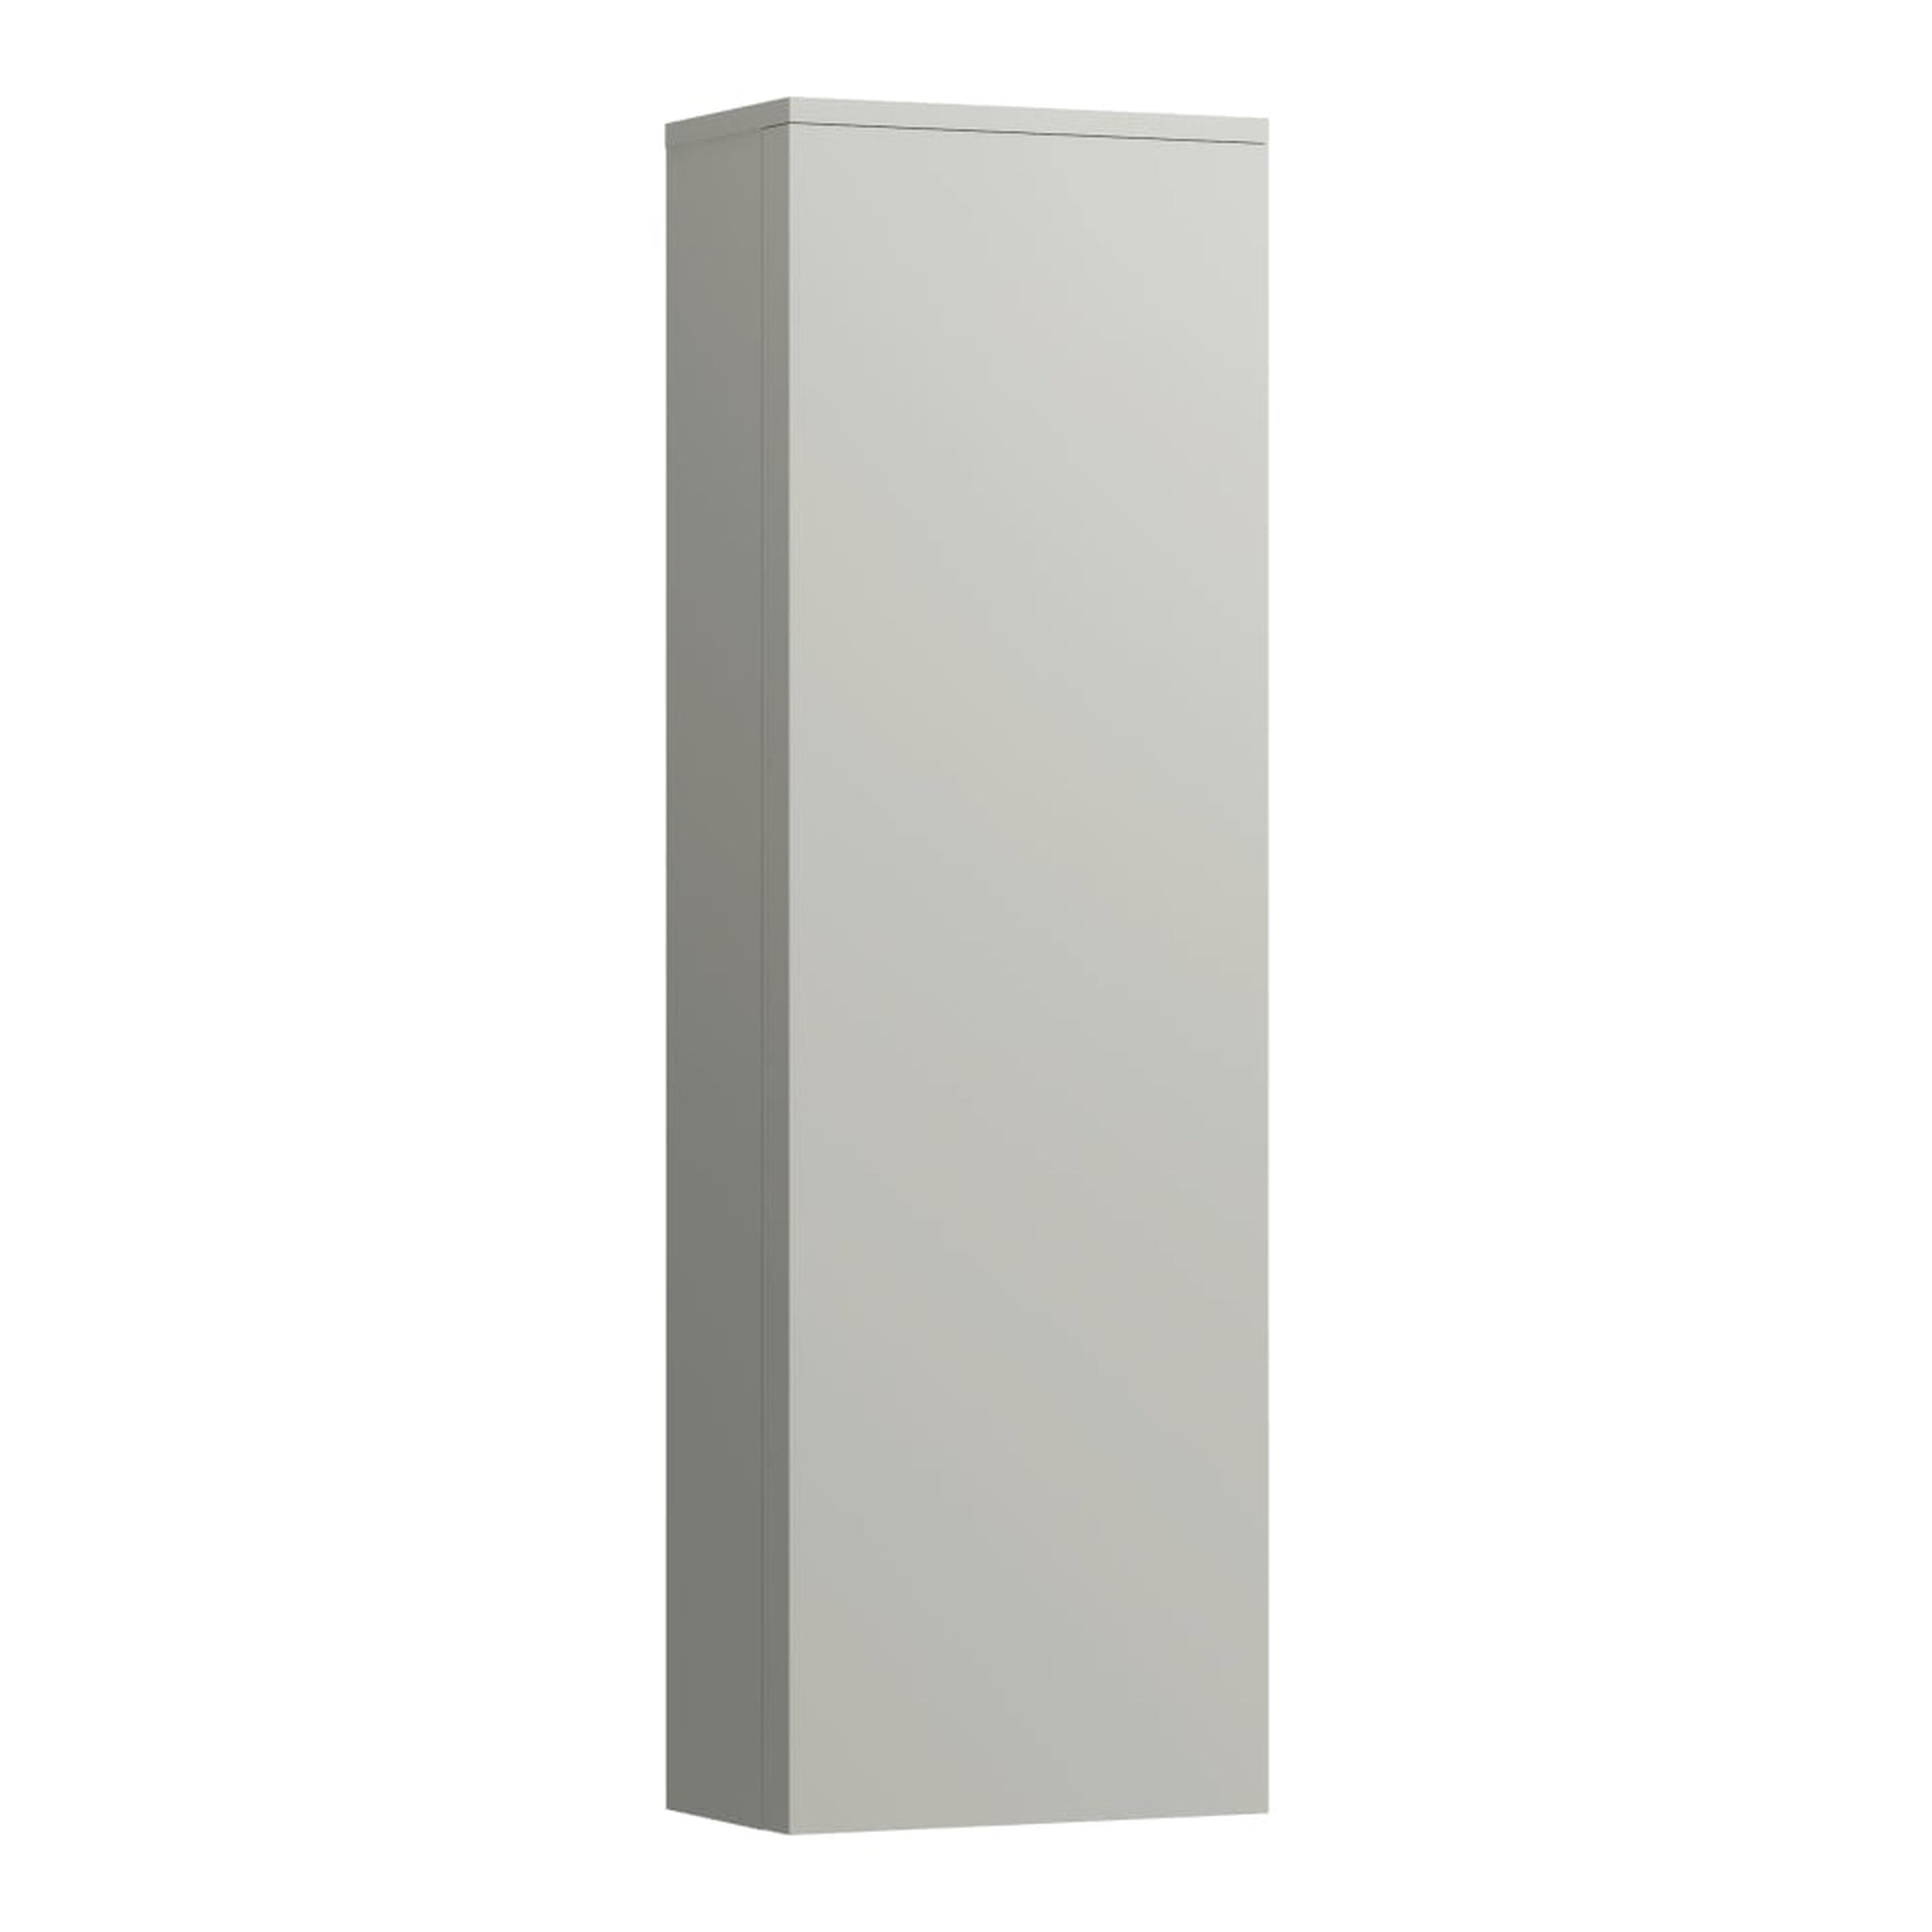 Laufen Kartell 16" x 51" 1-Door Left-Hinged Pebble Gray Wall-Mounted Tall Cabinet With 4 Fixed Glass Shelves